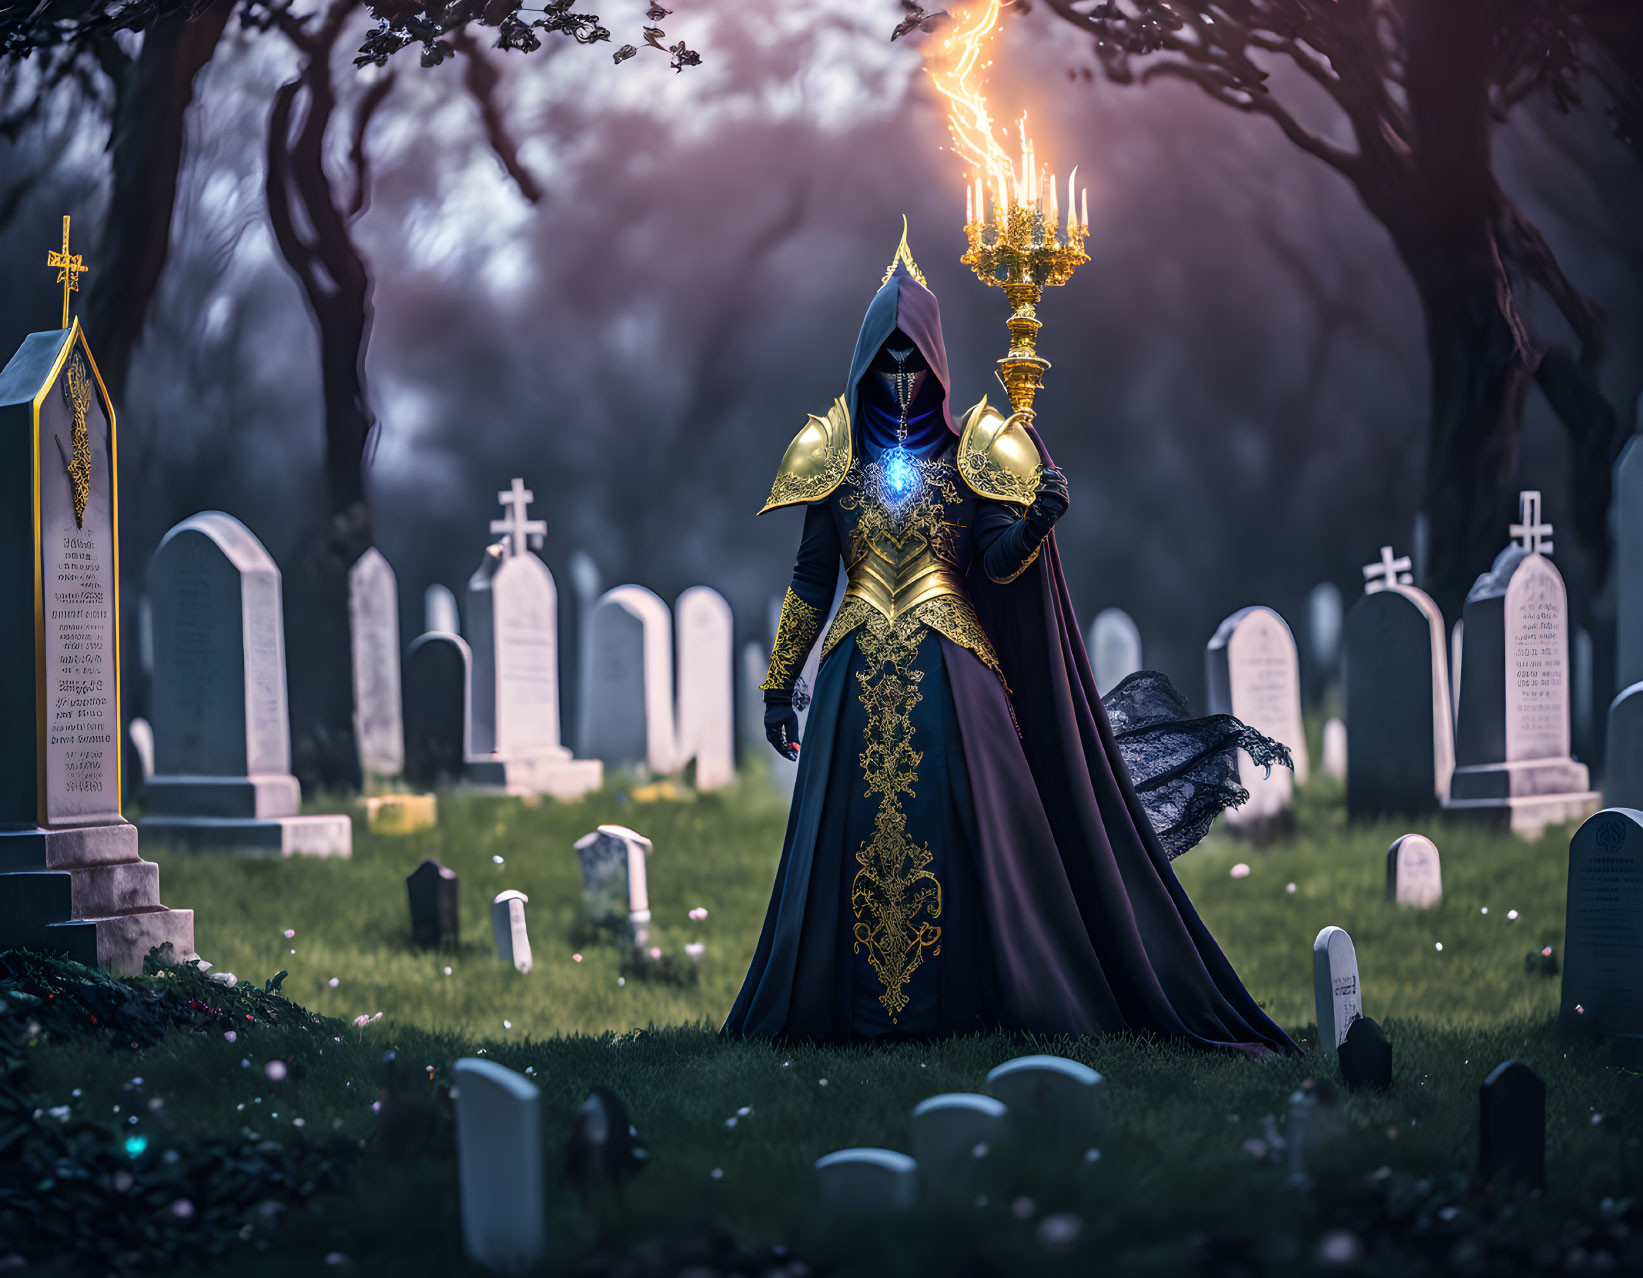 Cloaked figure in dark and gold armor with flaming staff in cemetery landscape